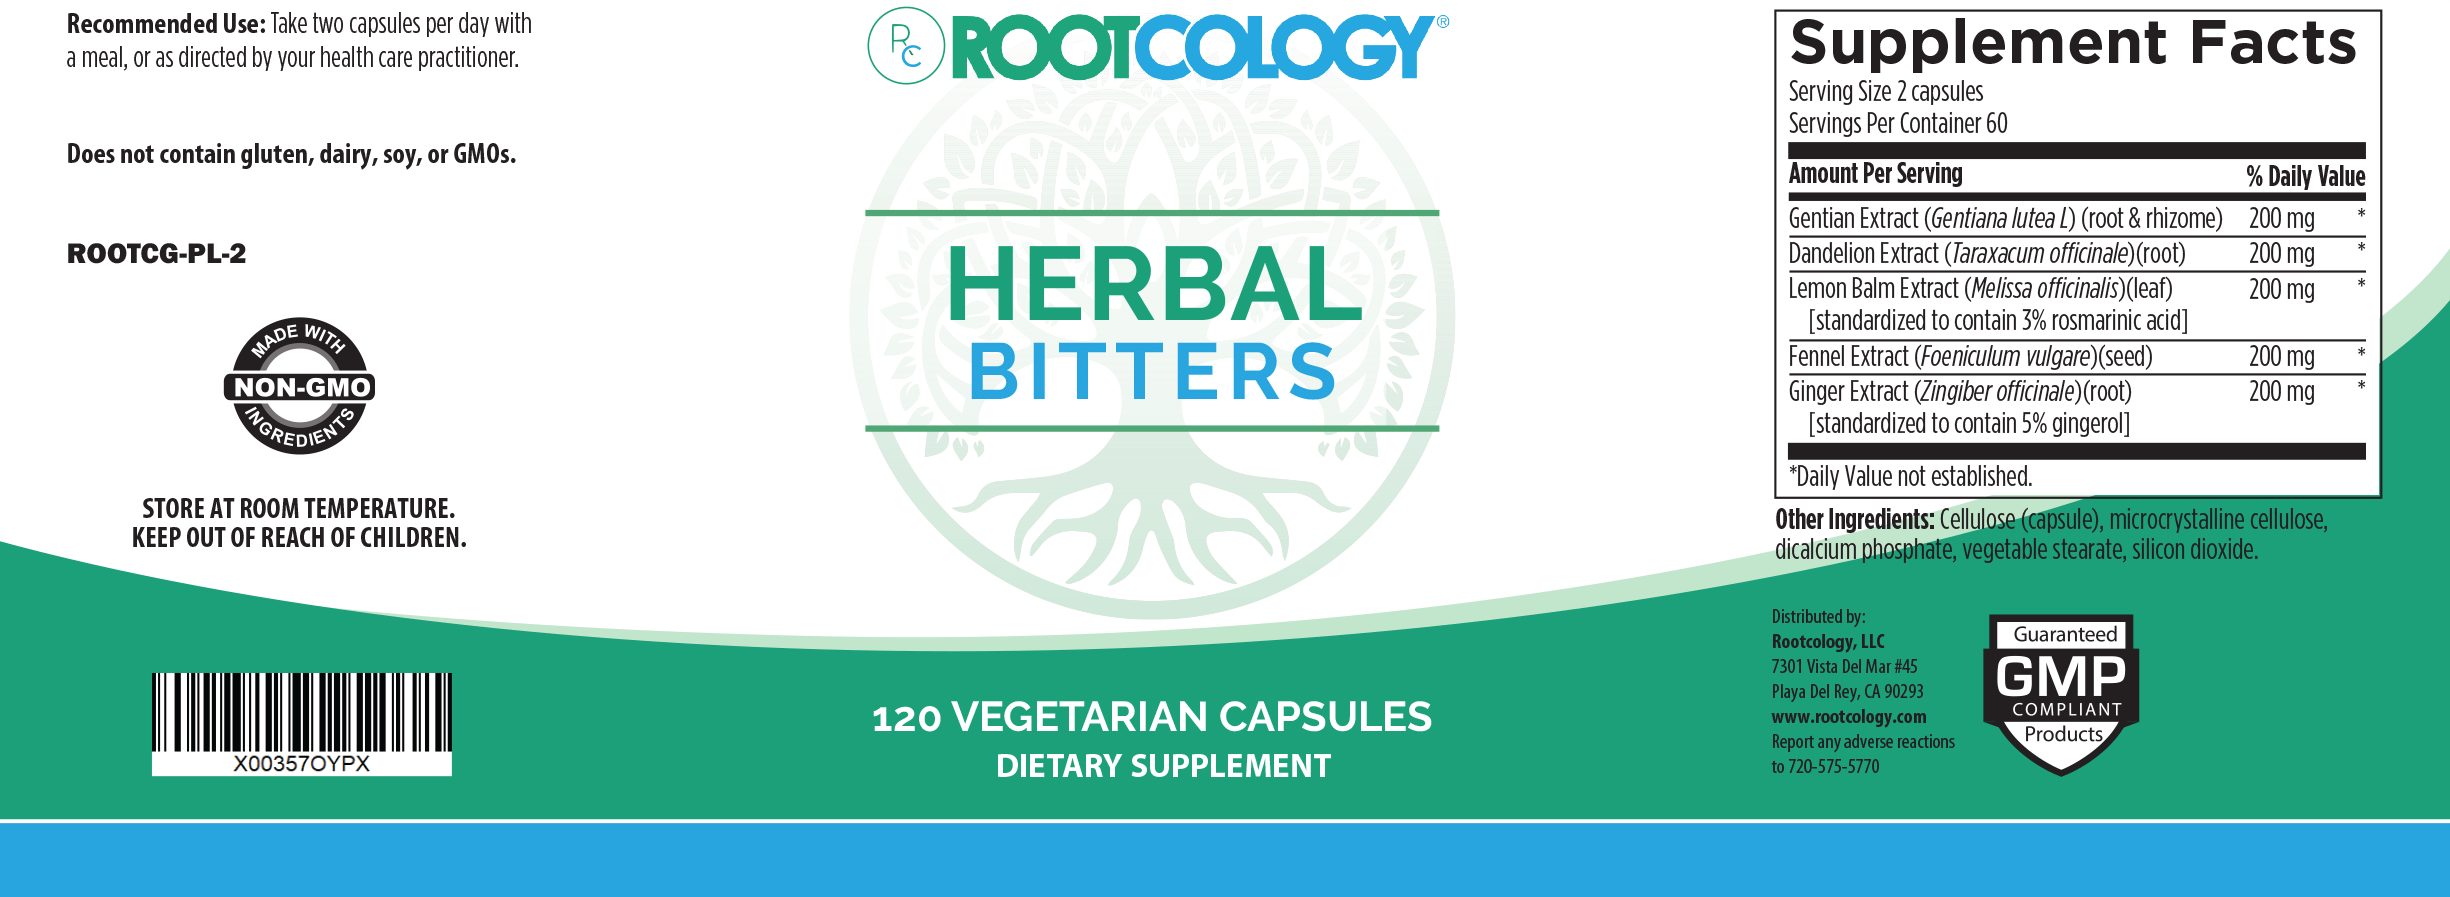 Rootcology Herbal Bitters Supplement Label